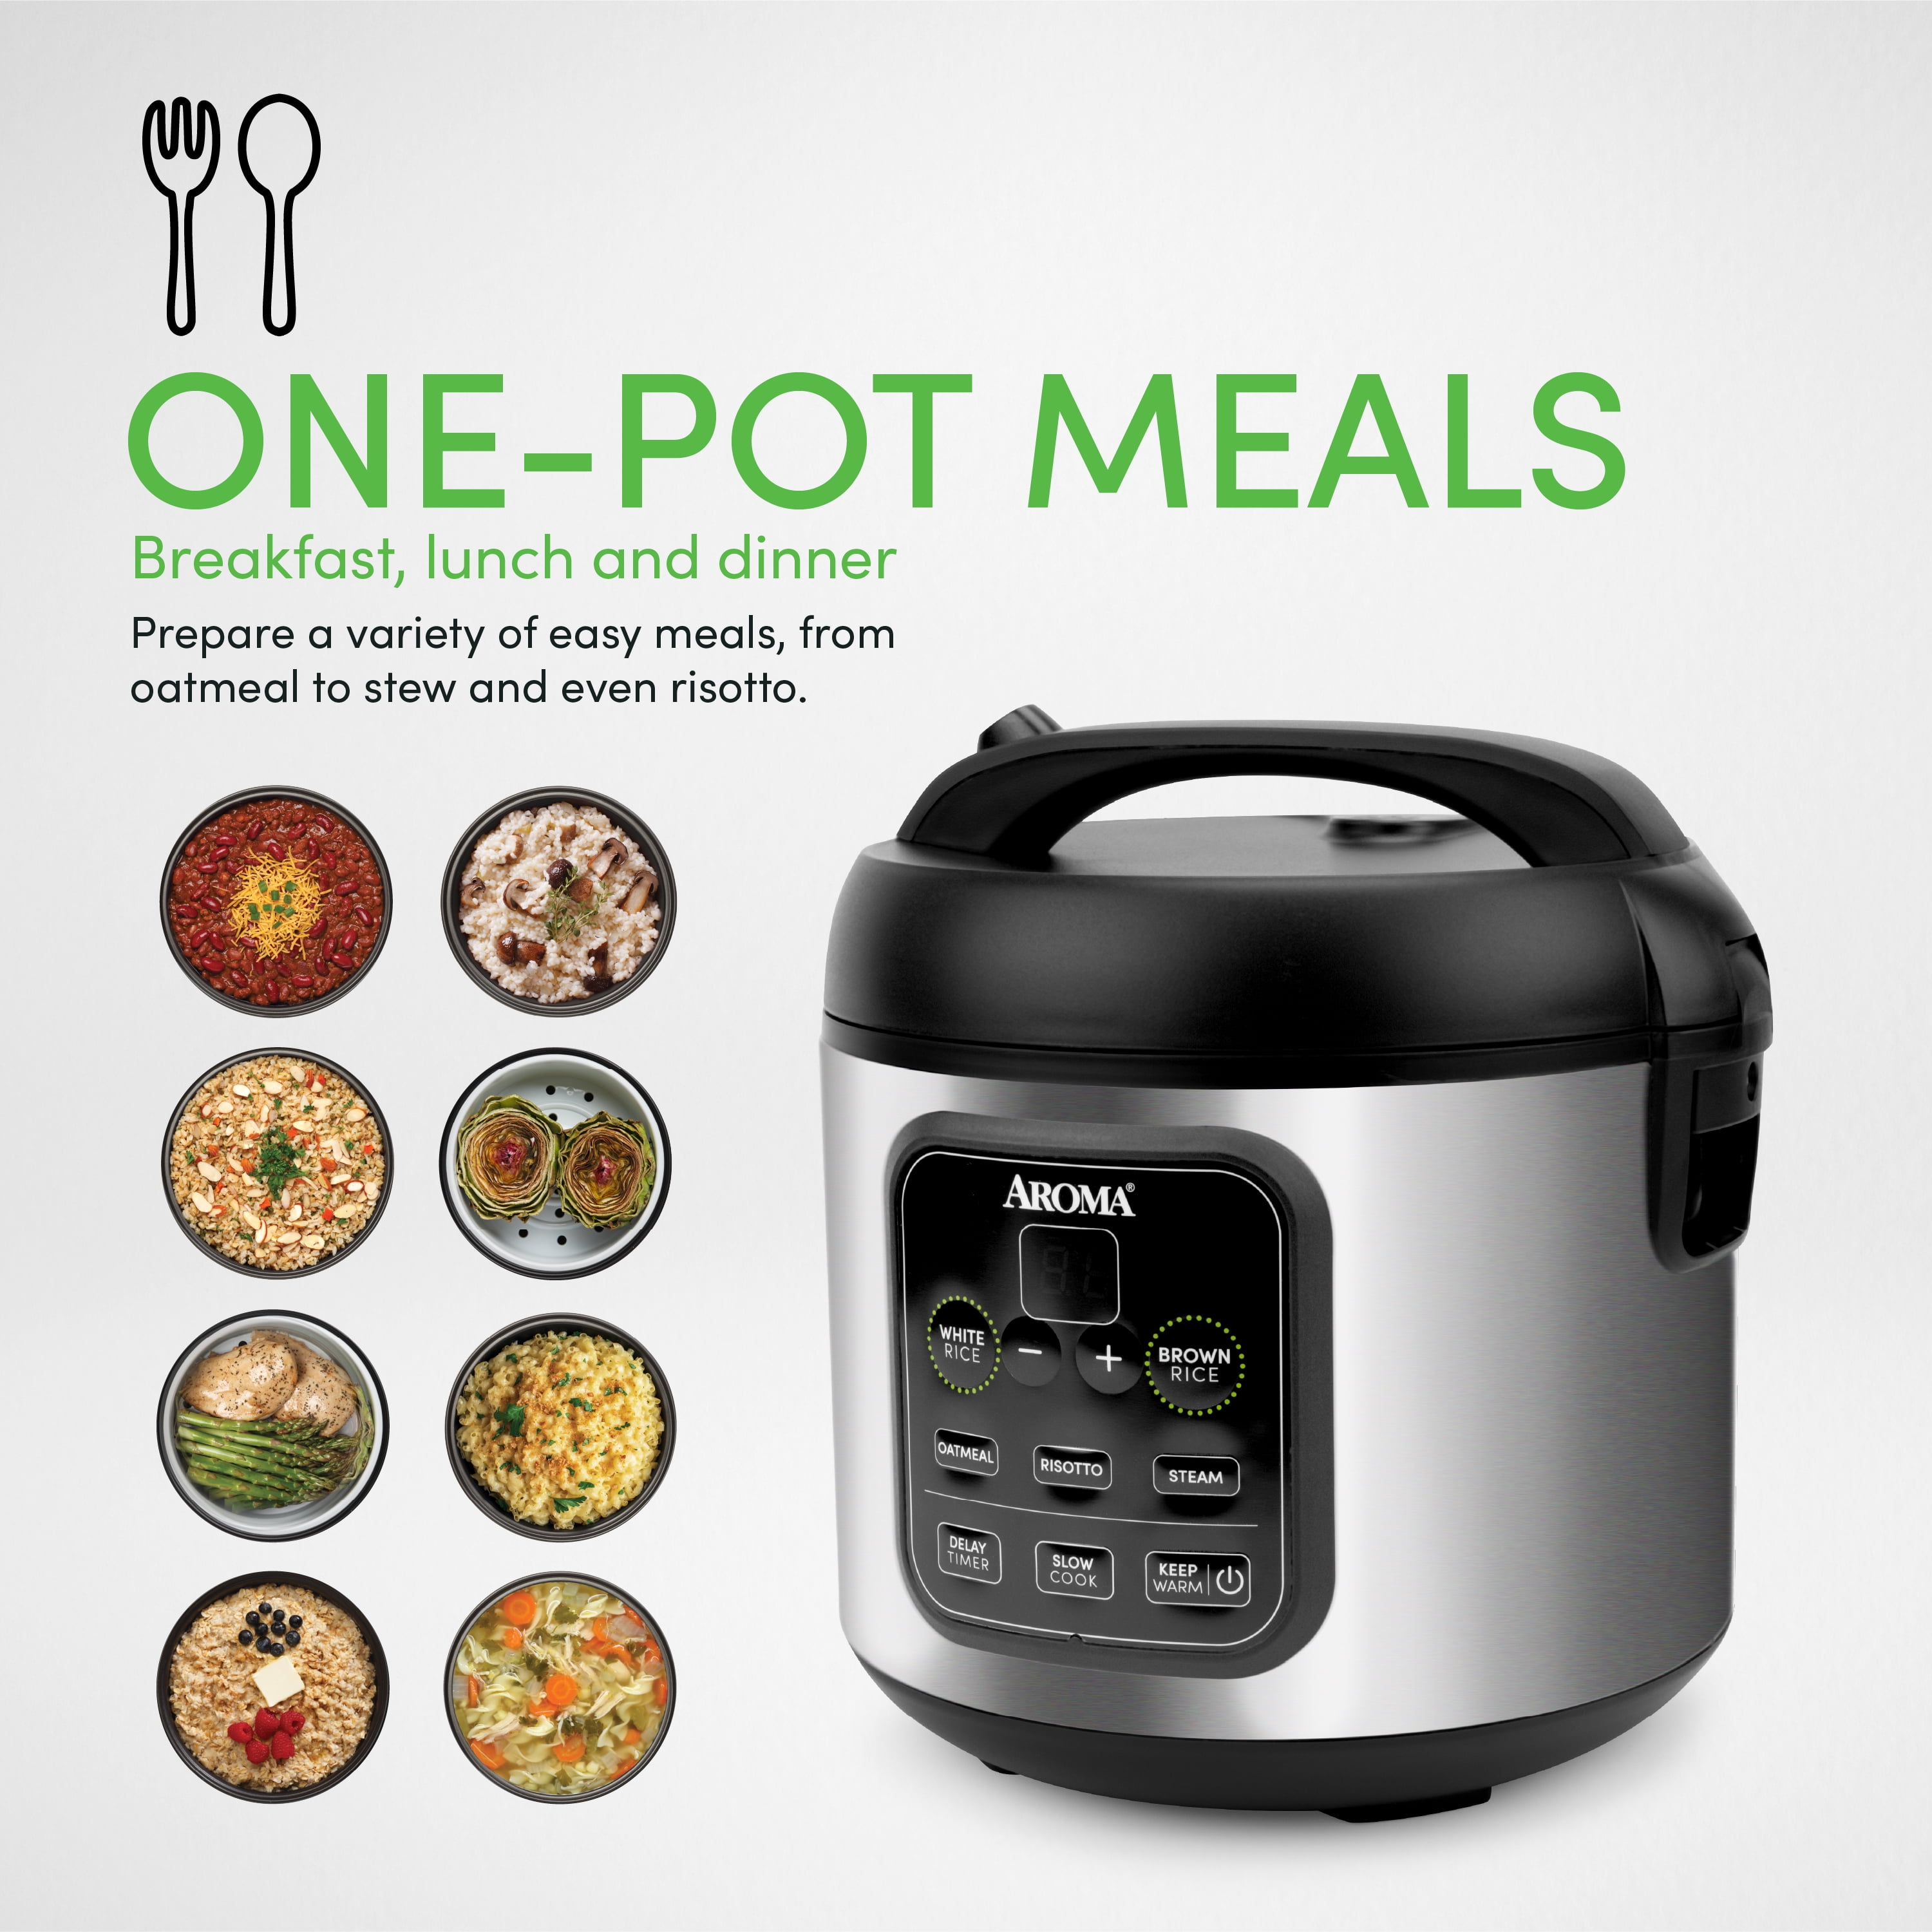 AROMA® 8-Cup (Cooked) / 2Qt. Digital Rice & Grain Multicooker [ARC